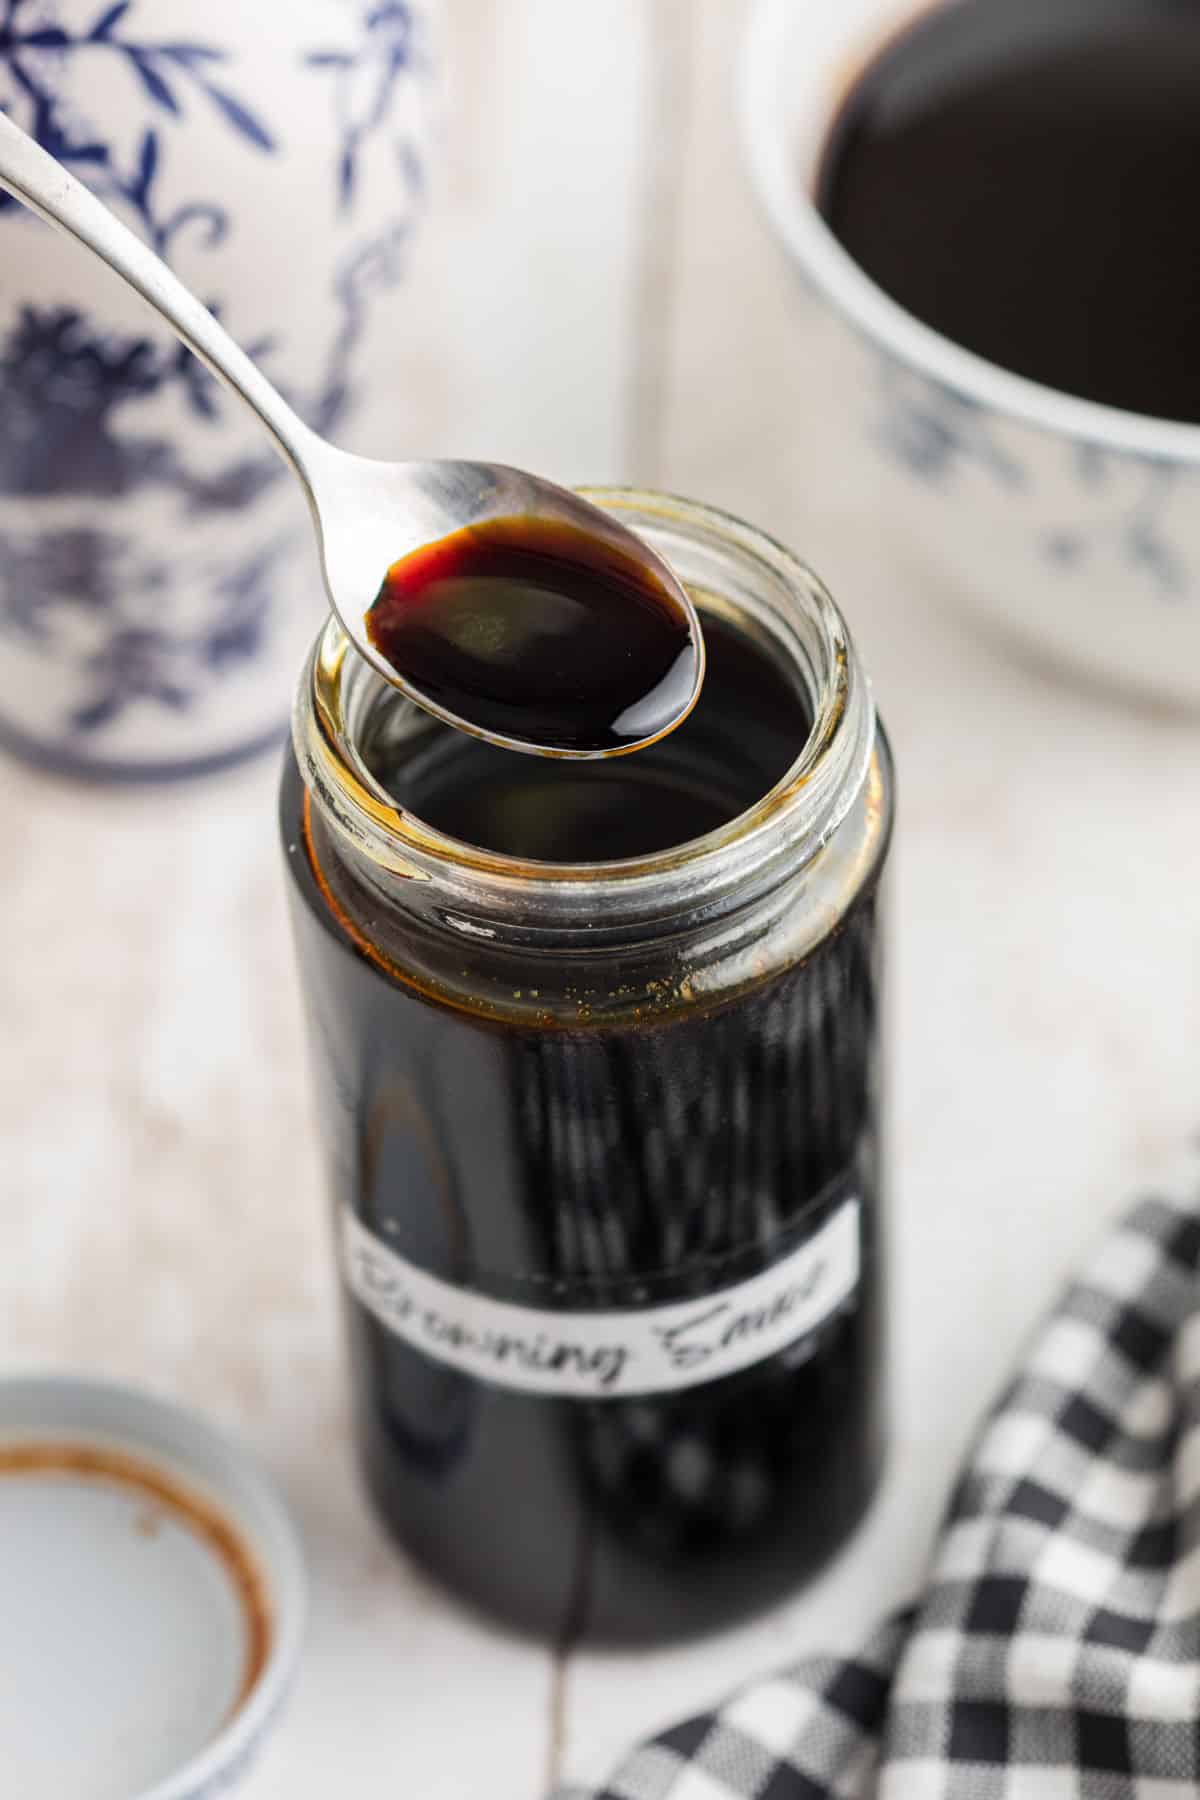 A jar of browning sauce, with a homemade label, with a spoon lifting some out.